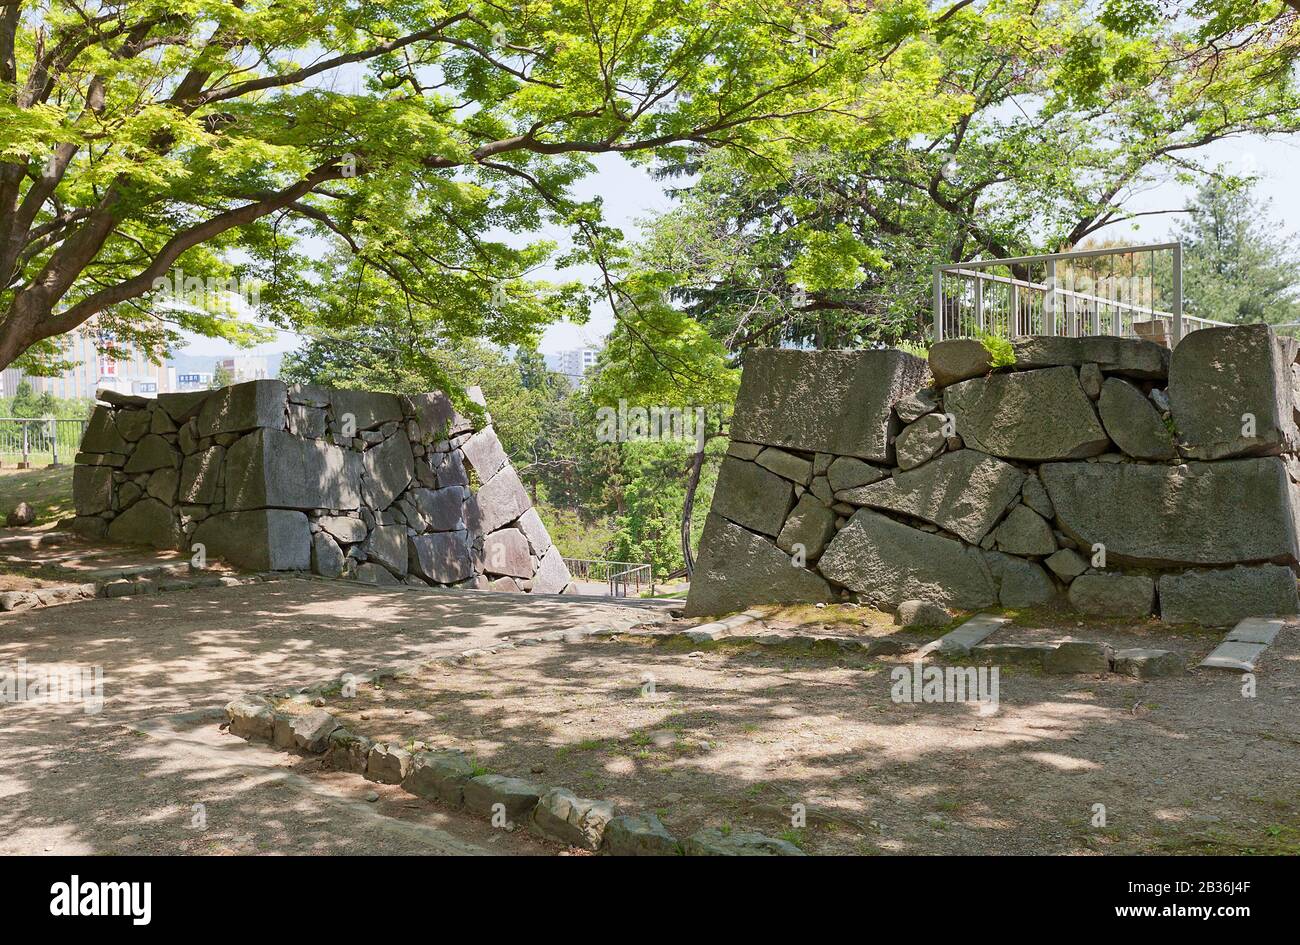 Site of former gate of Morioka castle, constructed in 1633 and dismantled in 19th c. Today is National Historic Site of Japan and part of Iwate Park Stock Photo